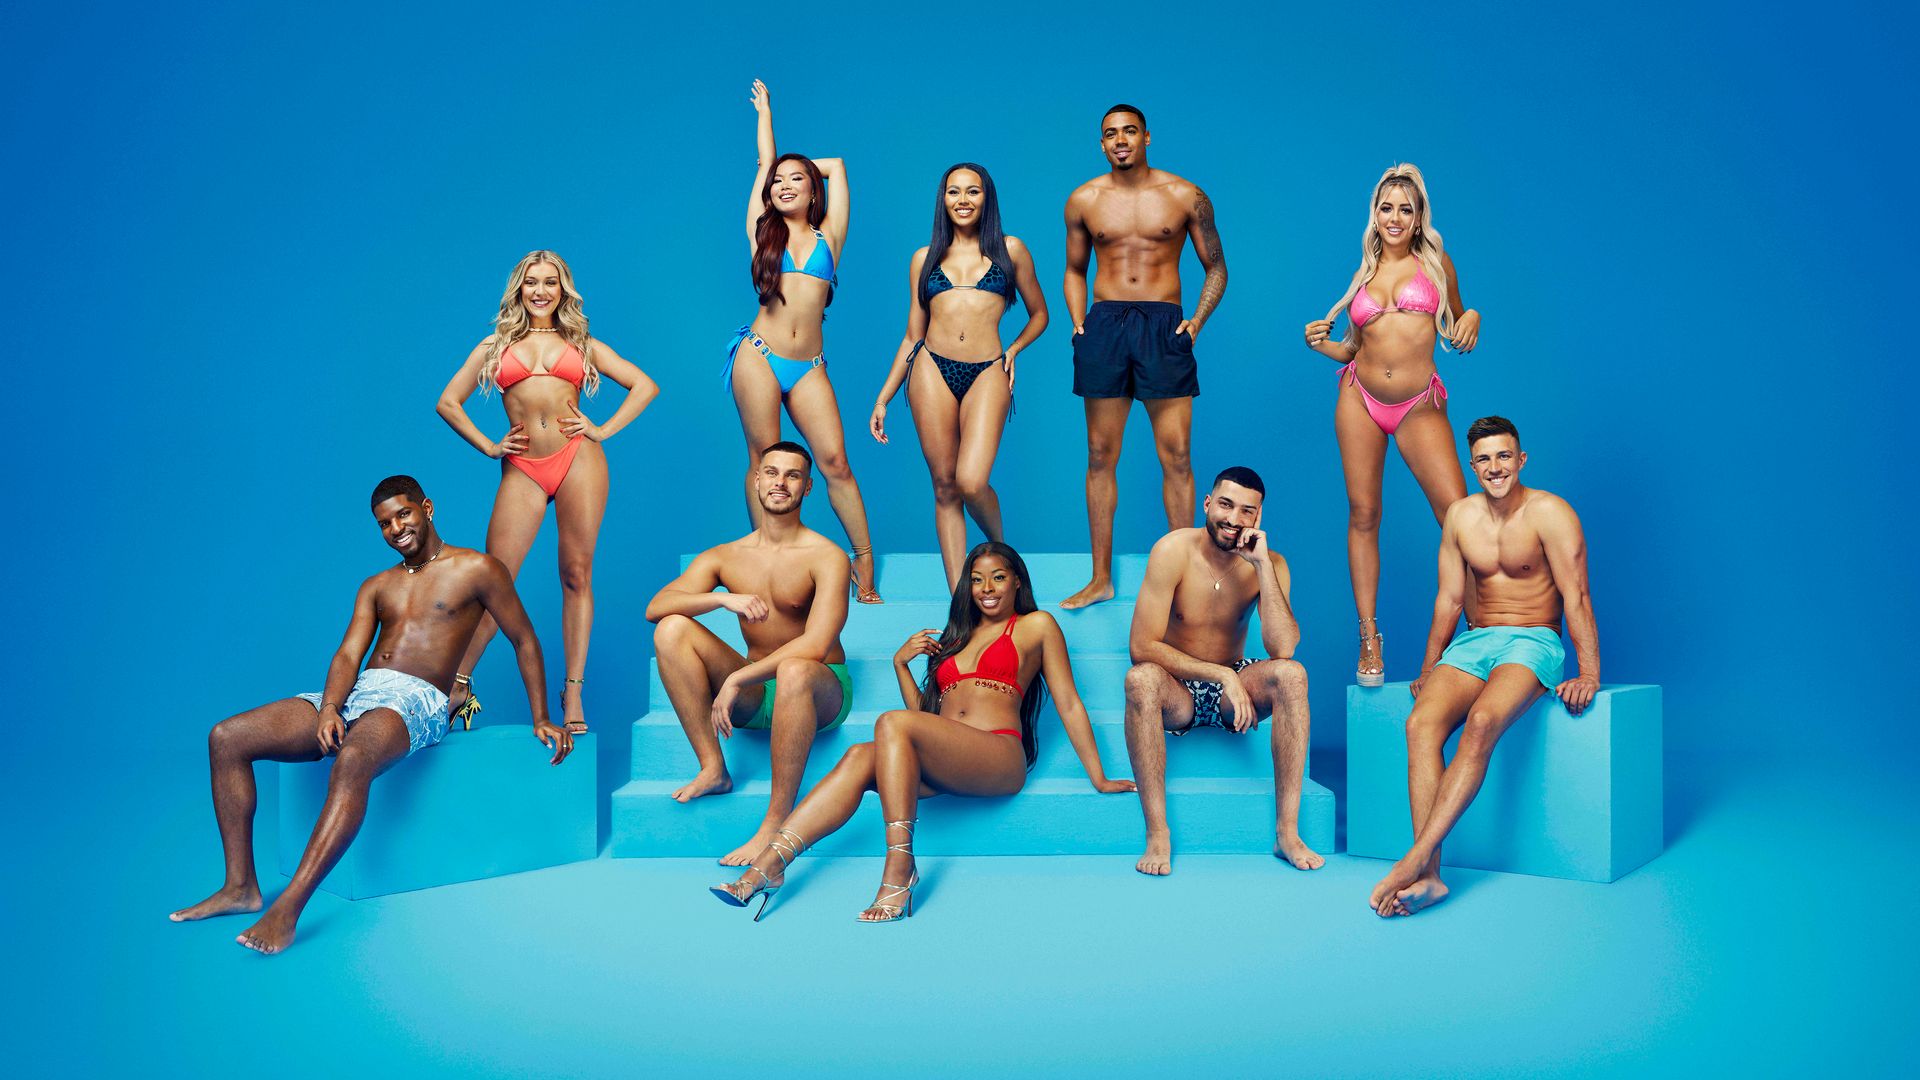 Love Island contestants pose in front of blue background for official photos